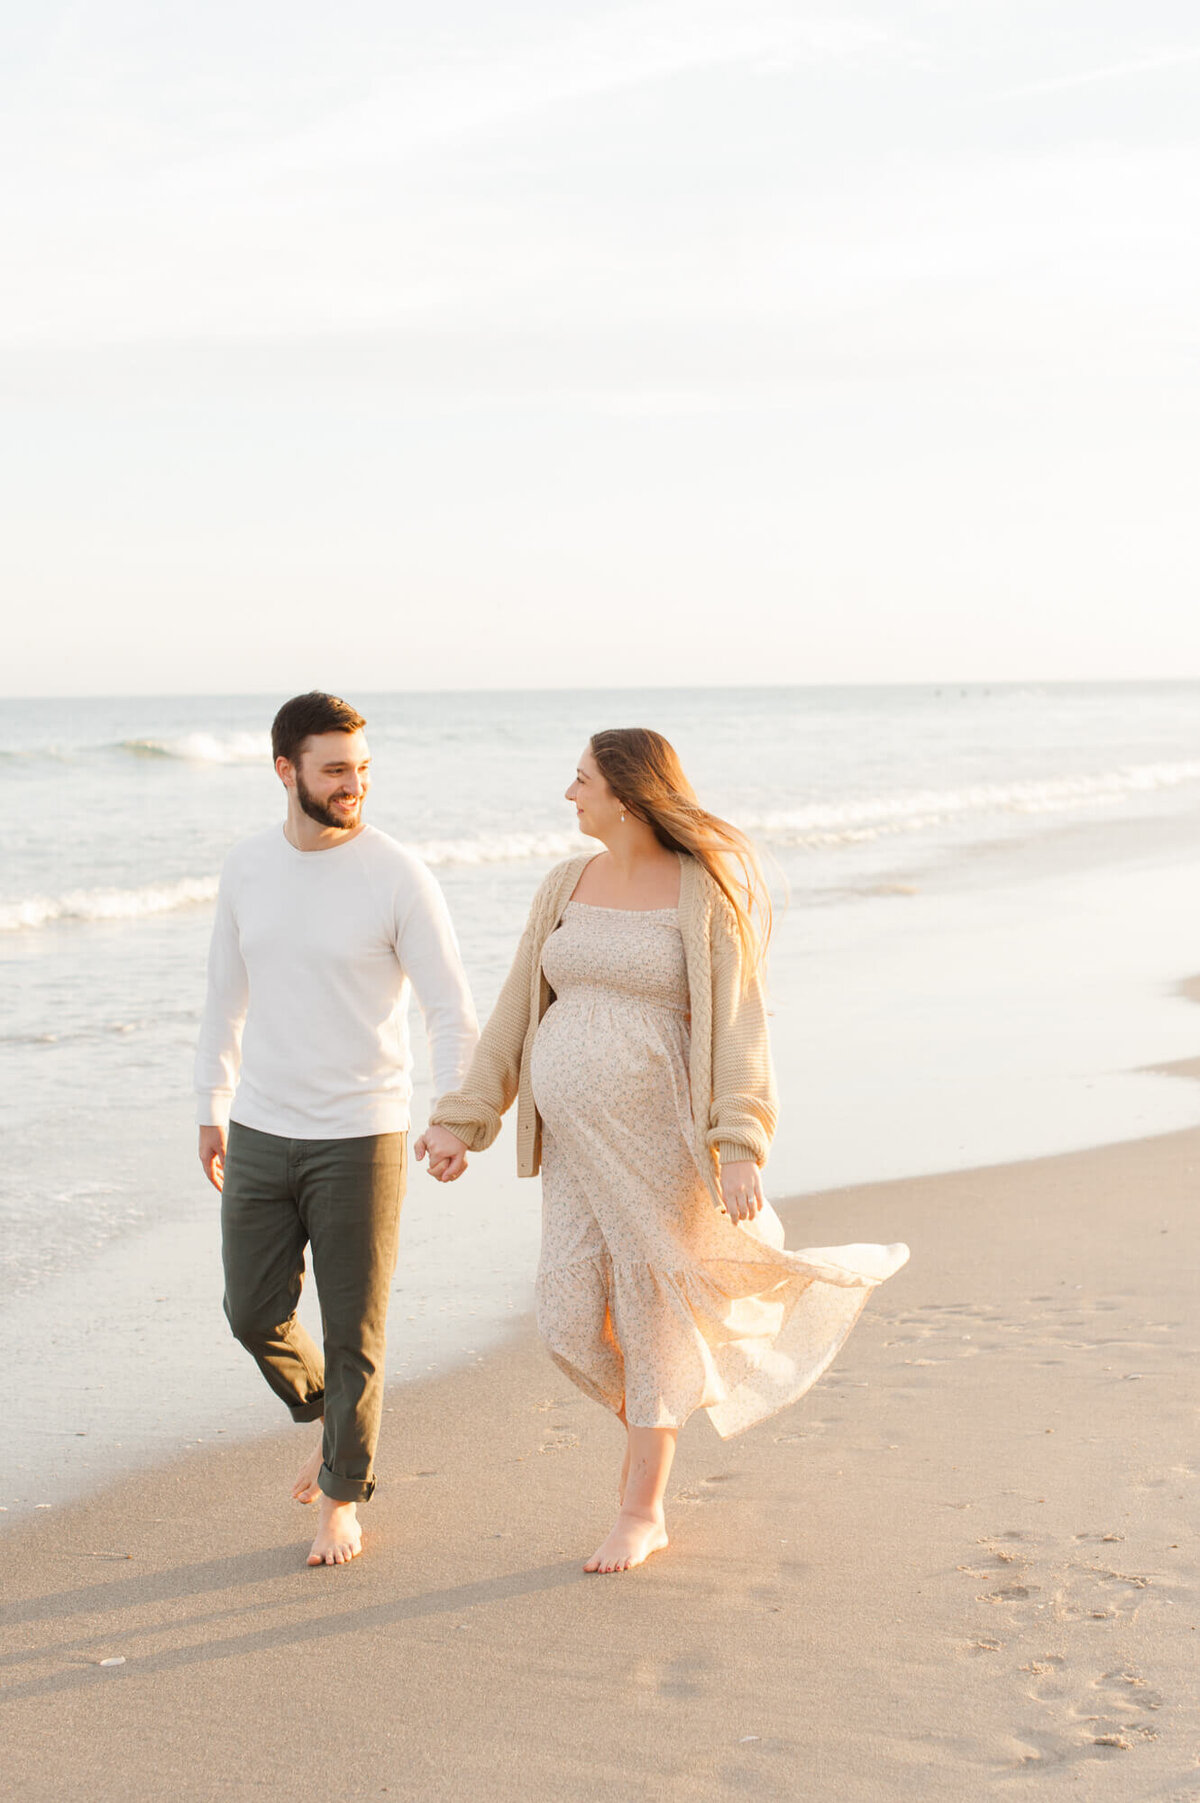 New parents walk along the shoreline holding hands and smiling at each other during sunset